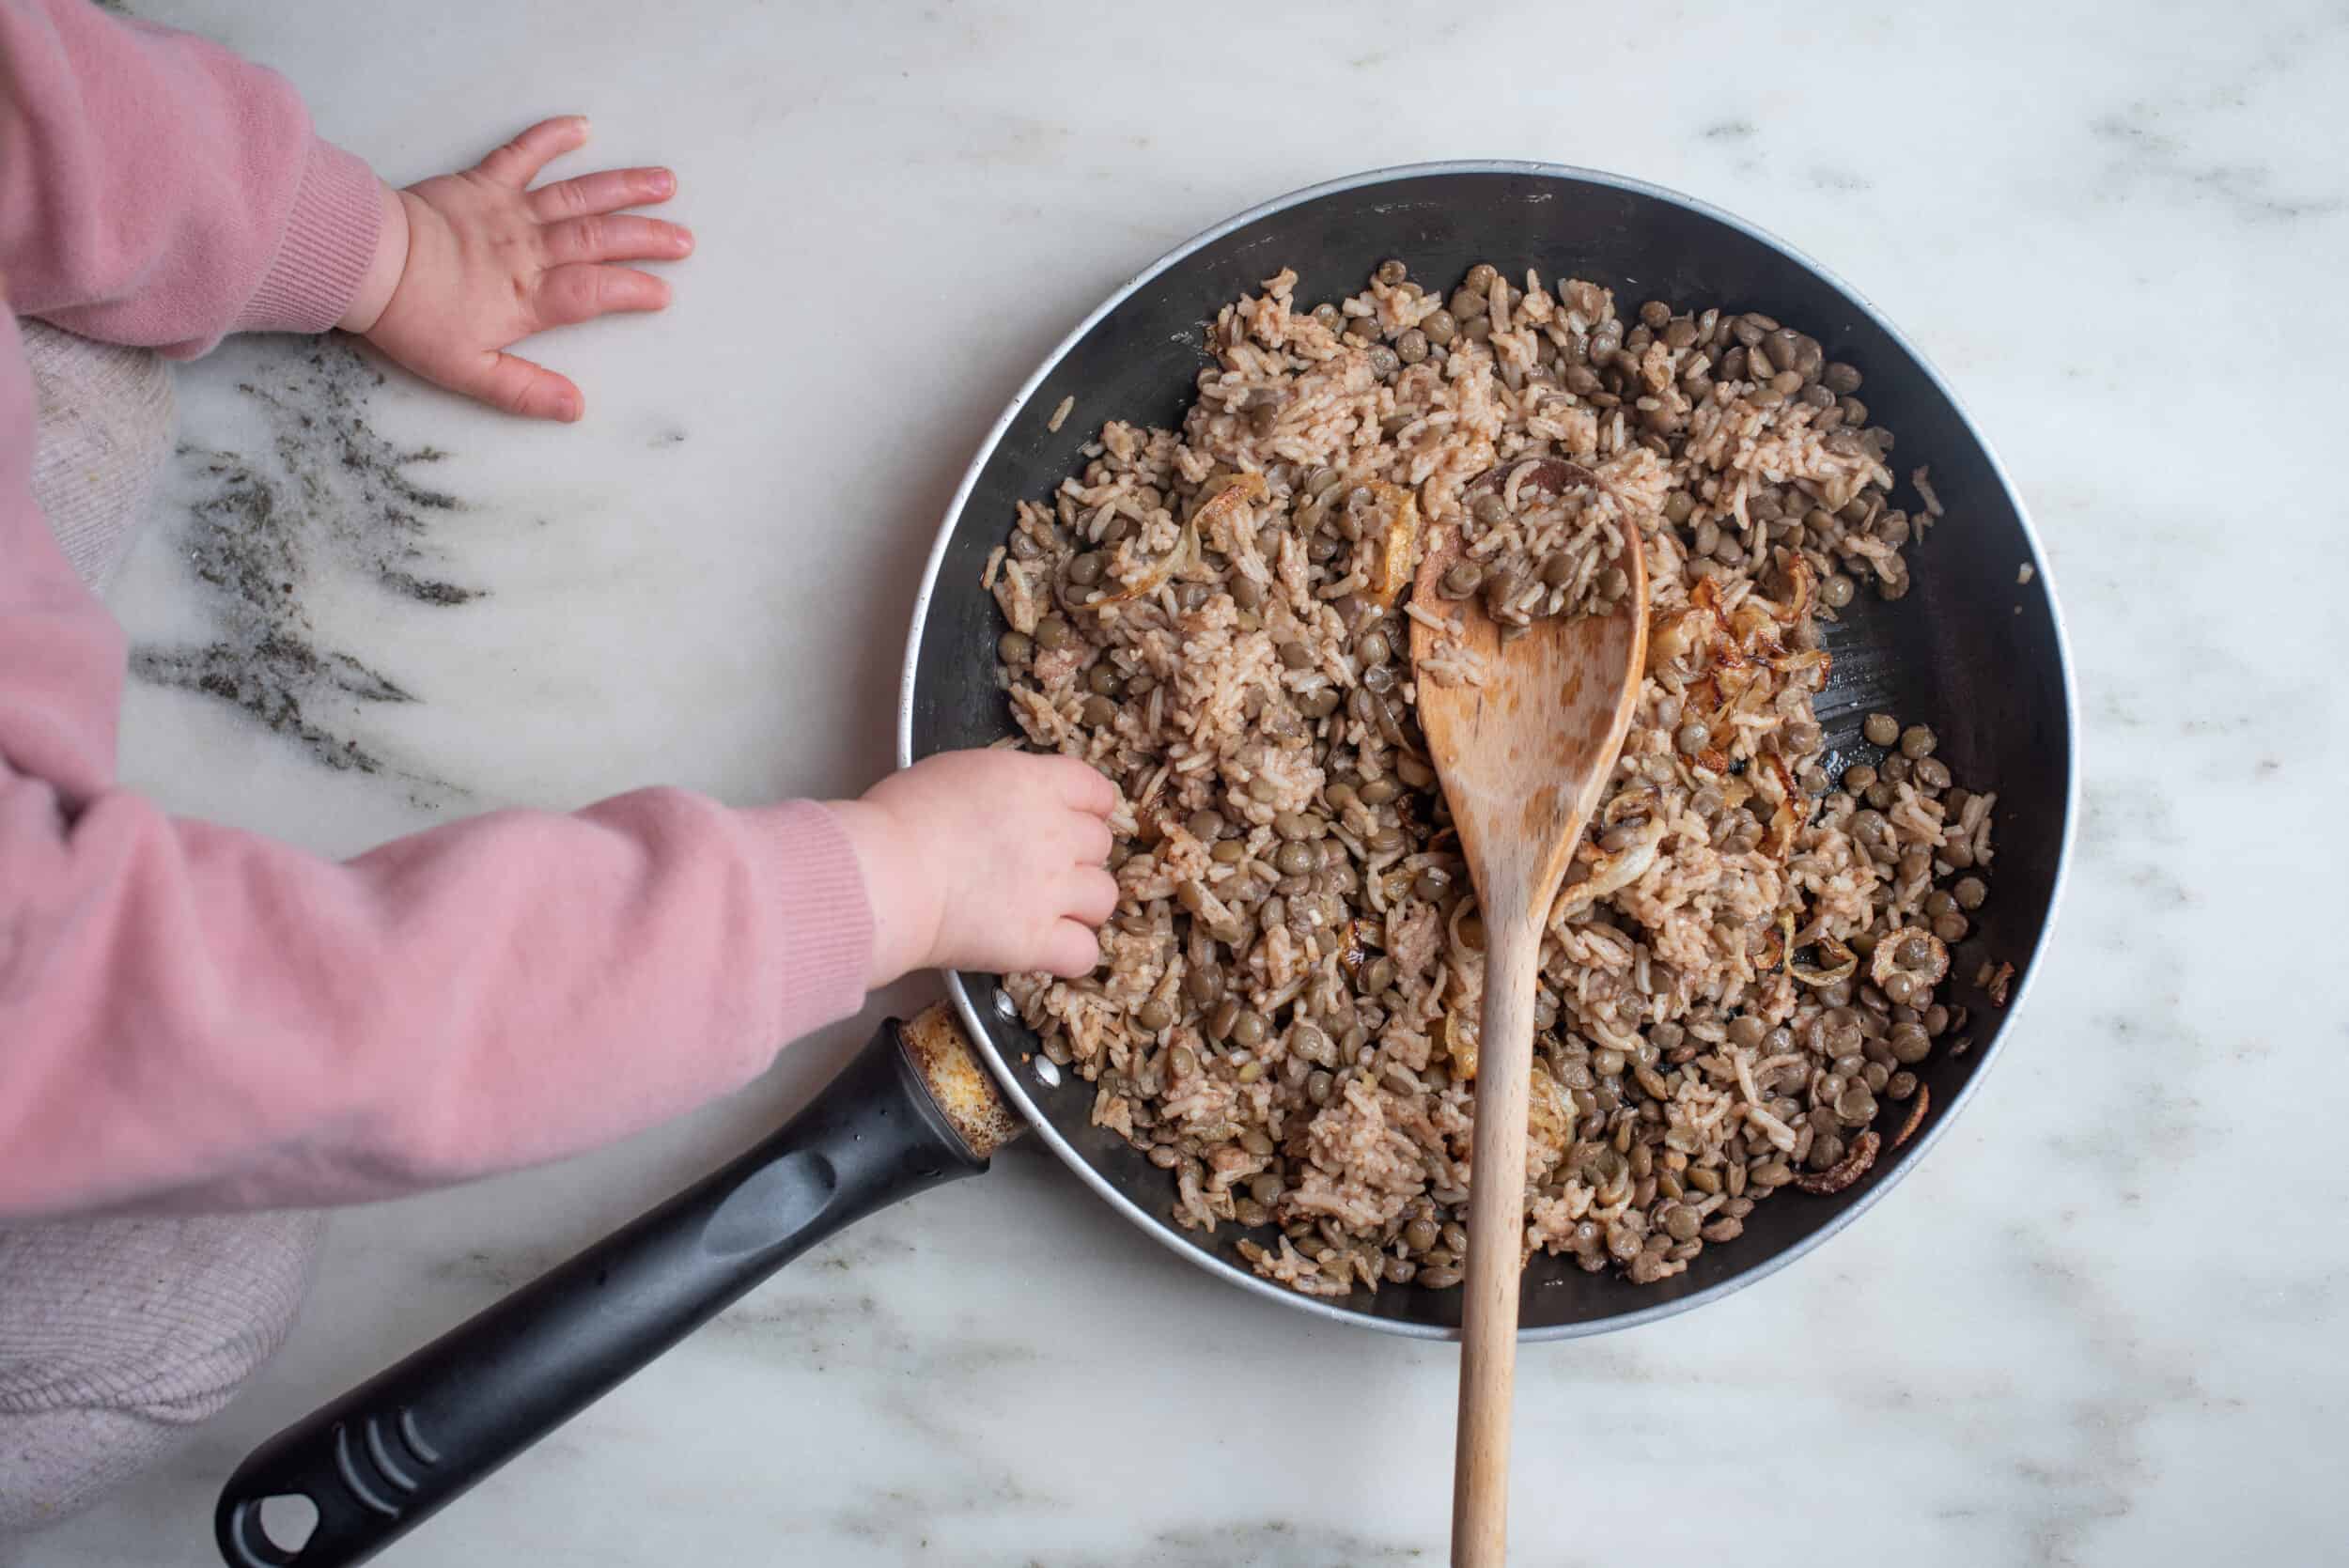 baby's hand reaching into a frying pan filled with lentils, sitting on a countertop with a wooden spoon in the pan